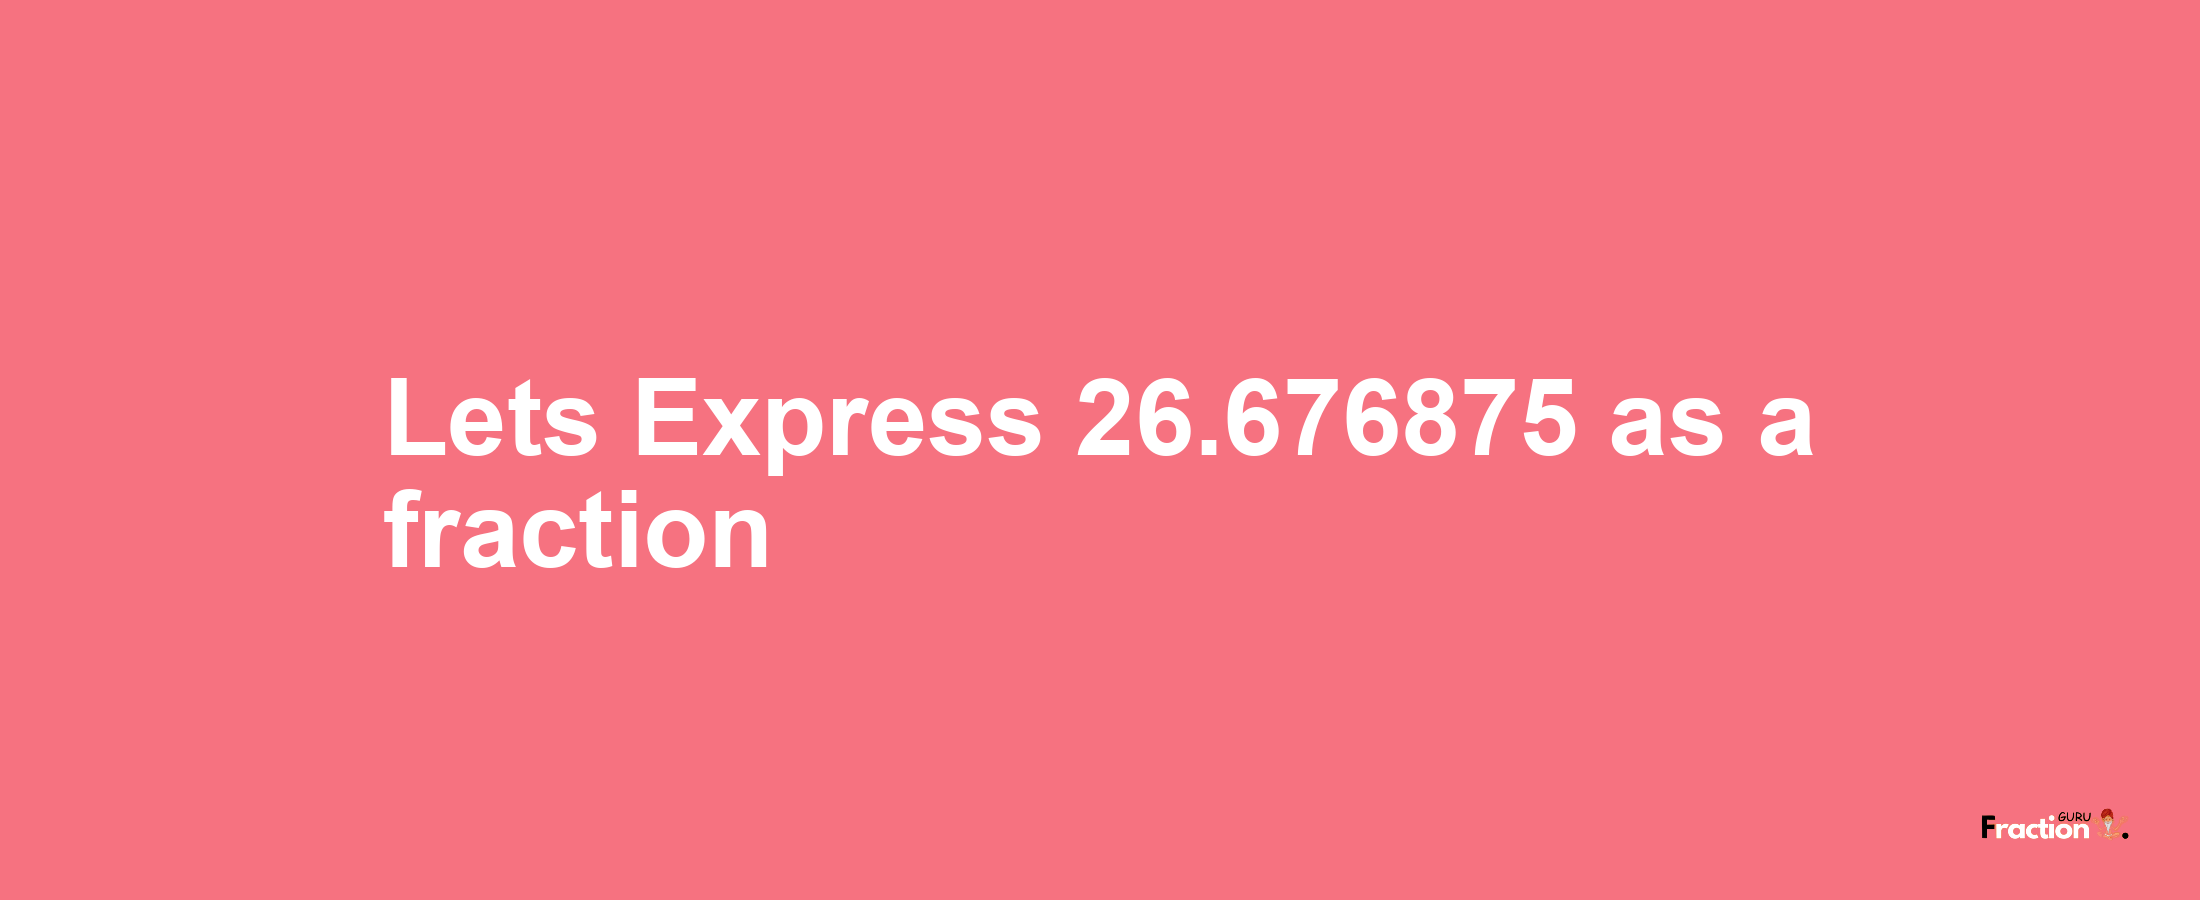 Lets Express 26.676875 as afraction